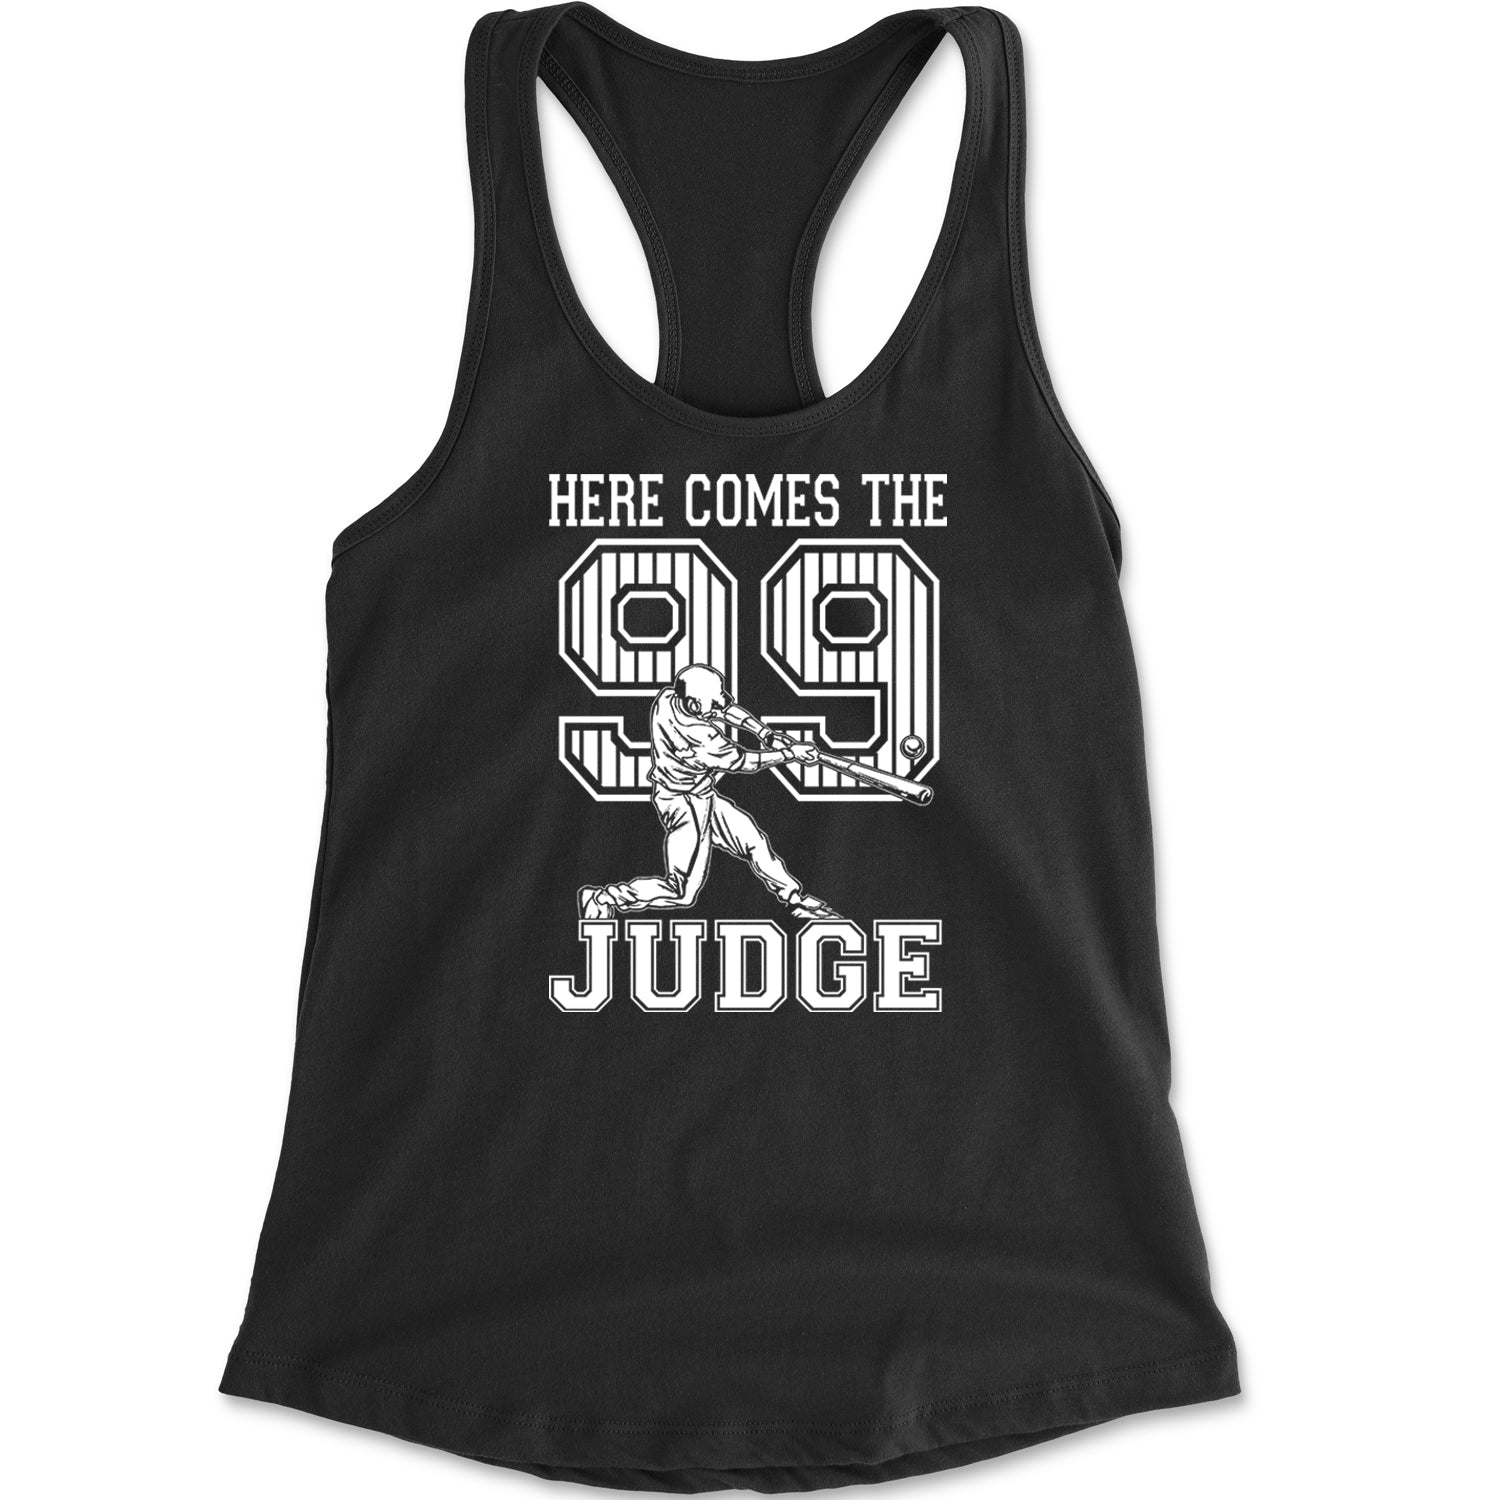 Here Comes The Judge 99 NY Baseball  Racerback Tank Top for Women